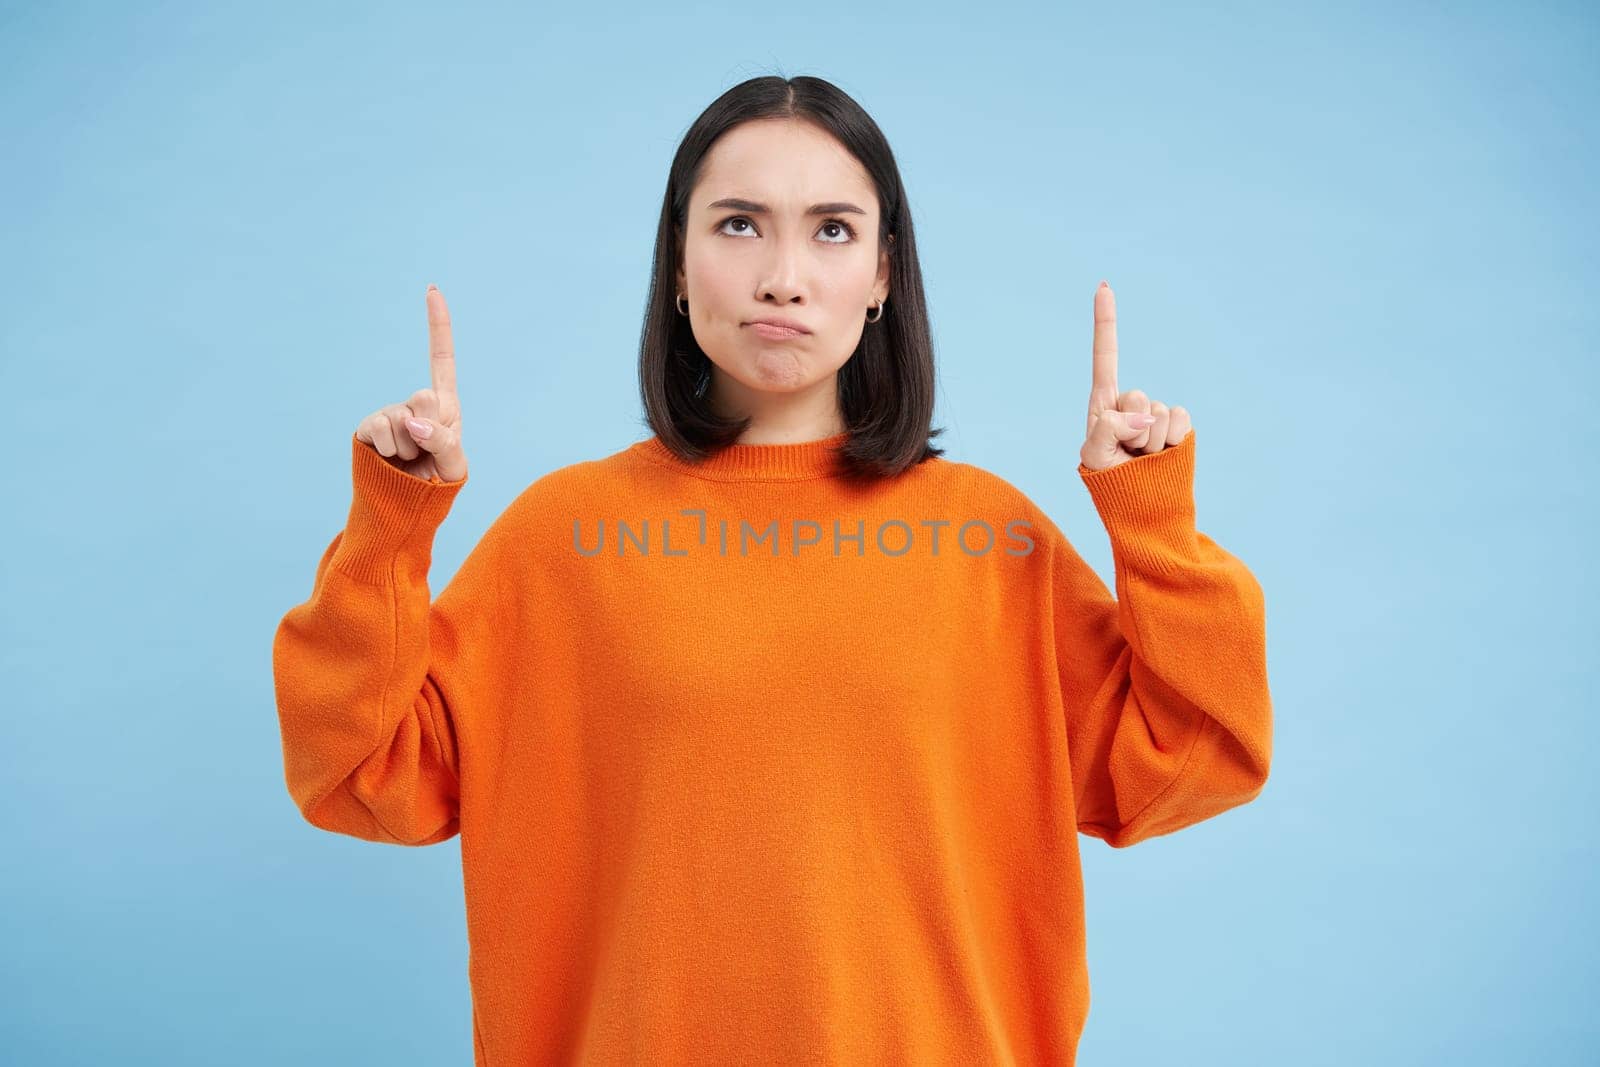 Perplexed asian girl, looks and points up with frustrated, thinking face expression, shows advertisement and reads it with doubt, stands over blue background.